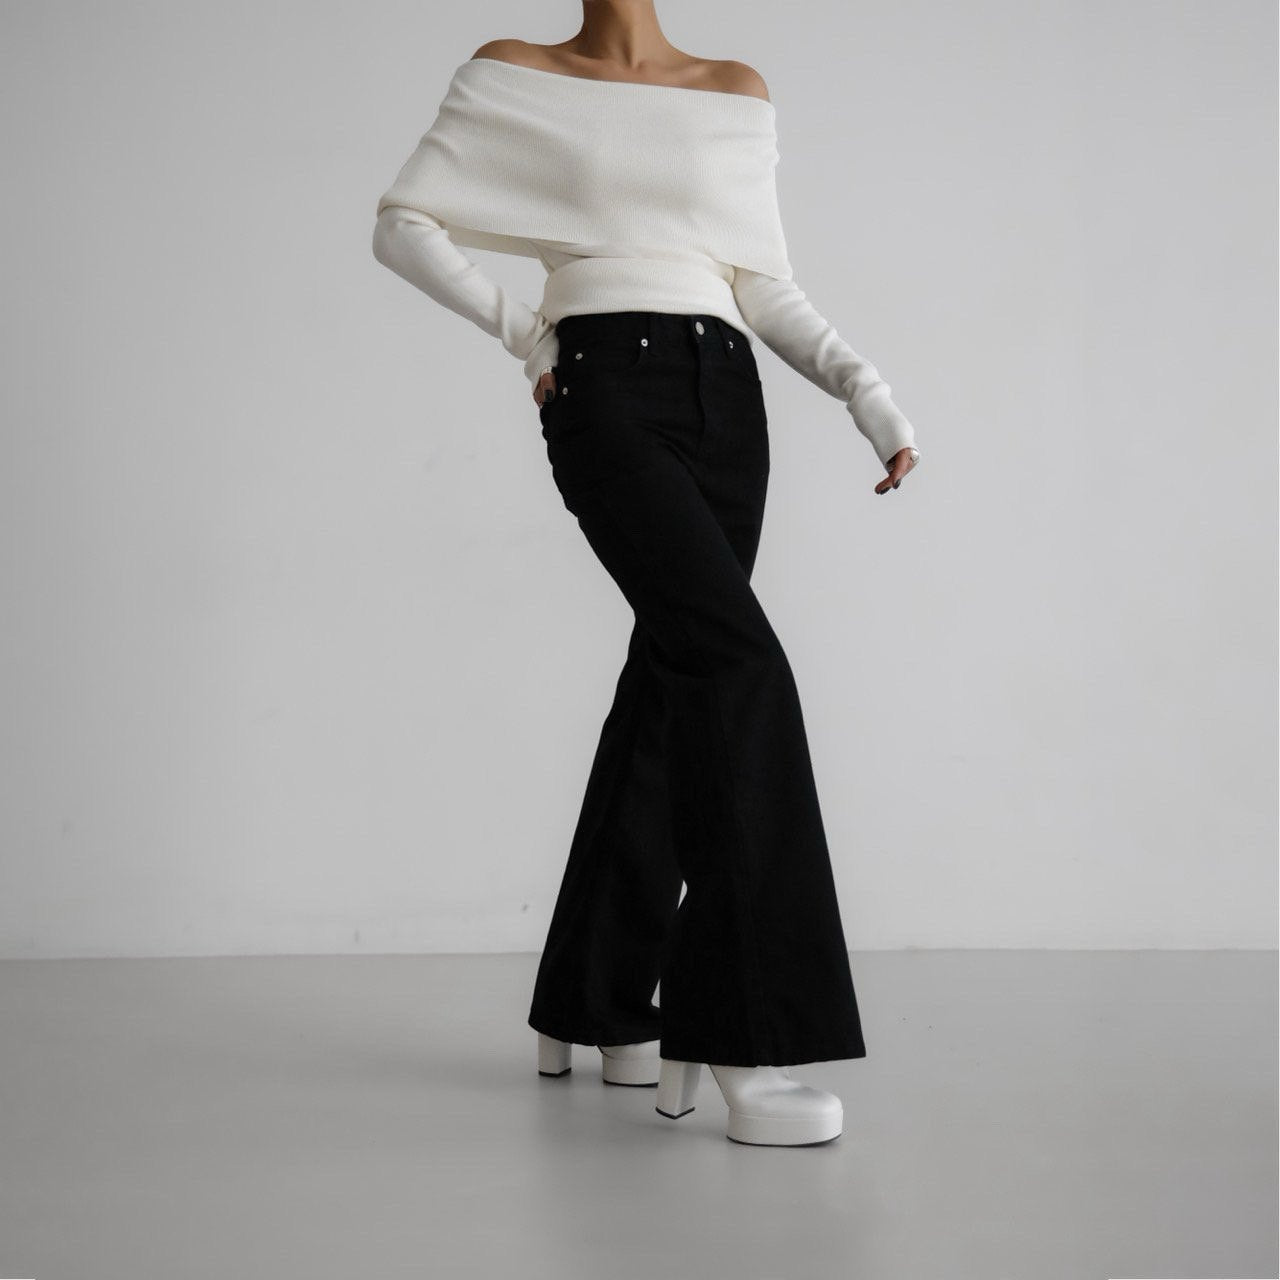 [PAPERMOON] SS / Off Shoulder Long Sleeved Knit Top